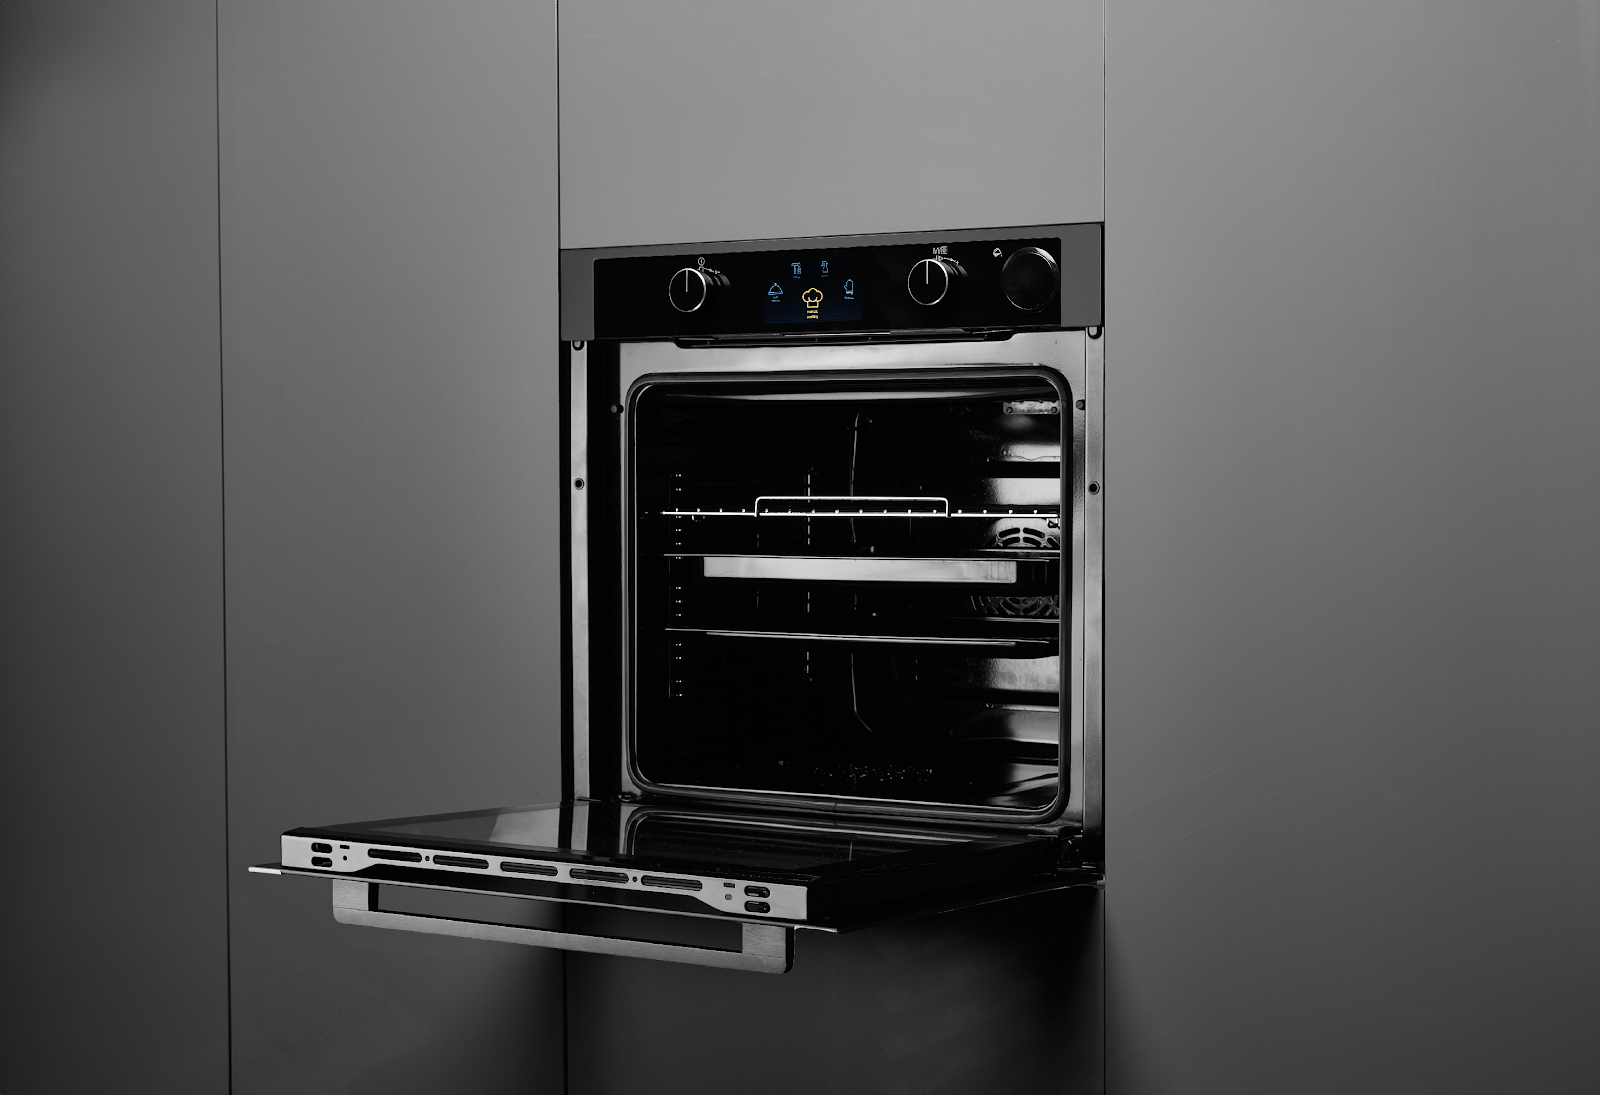 An open oven with a door open

Description automatically generated